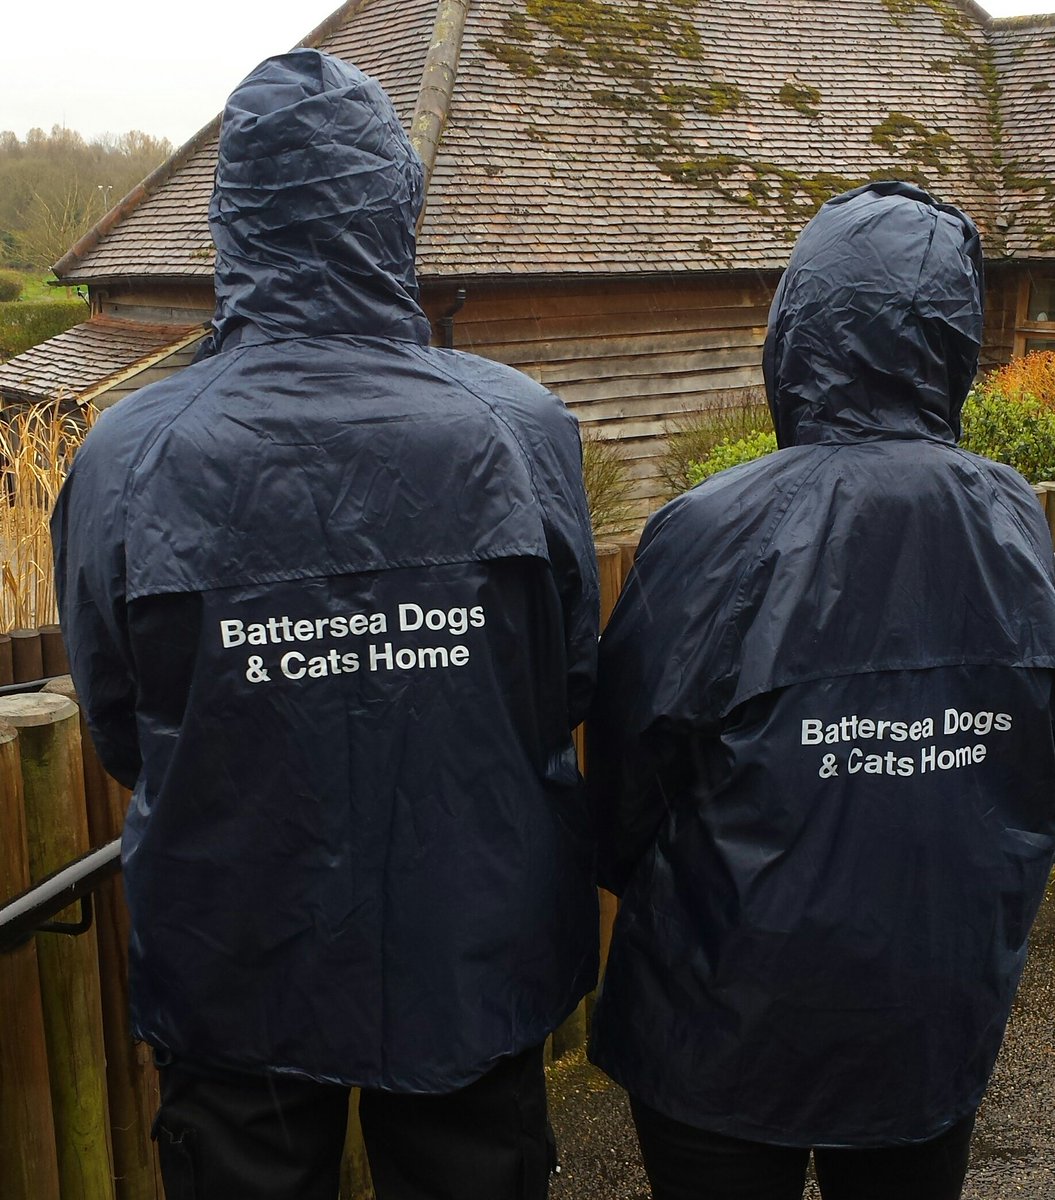 @BDCH @PostcodeLottery It was raining hard yesterday, so our #vols were delighted to wear their fab, new branded jackets. #ValuingVolunteers